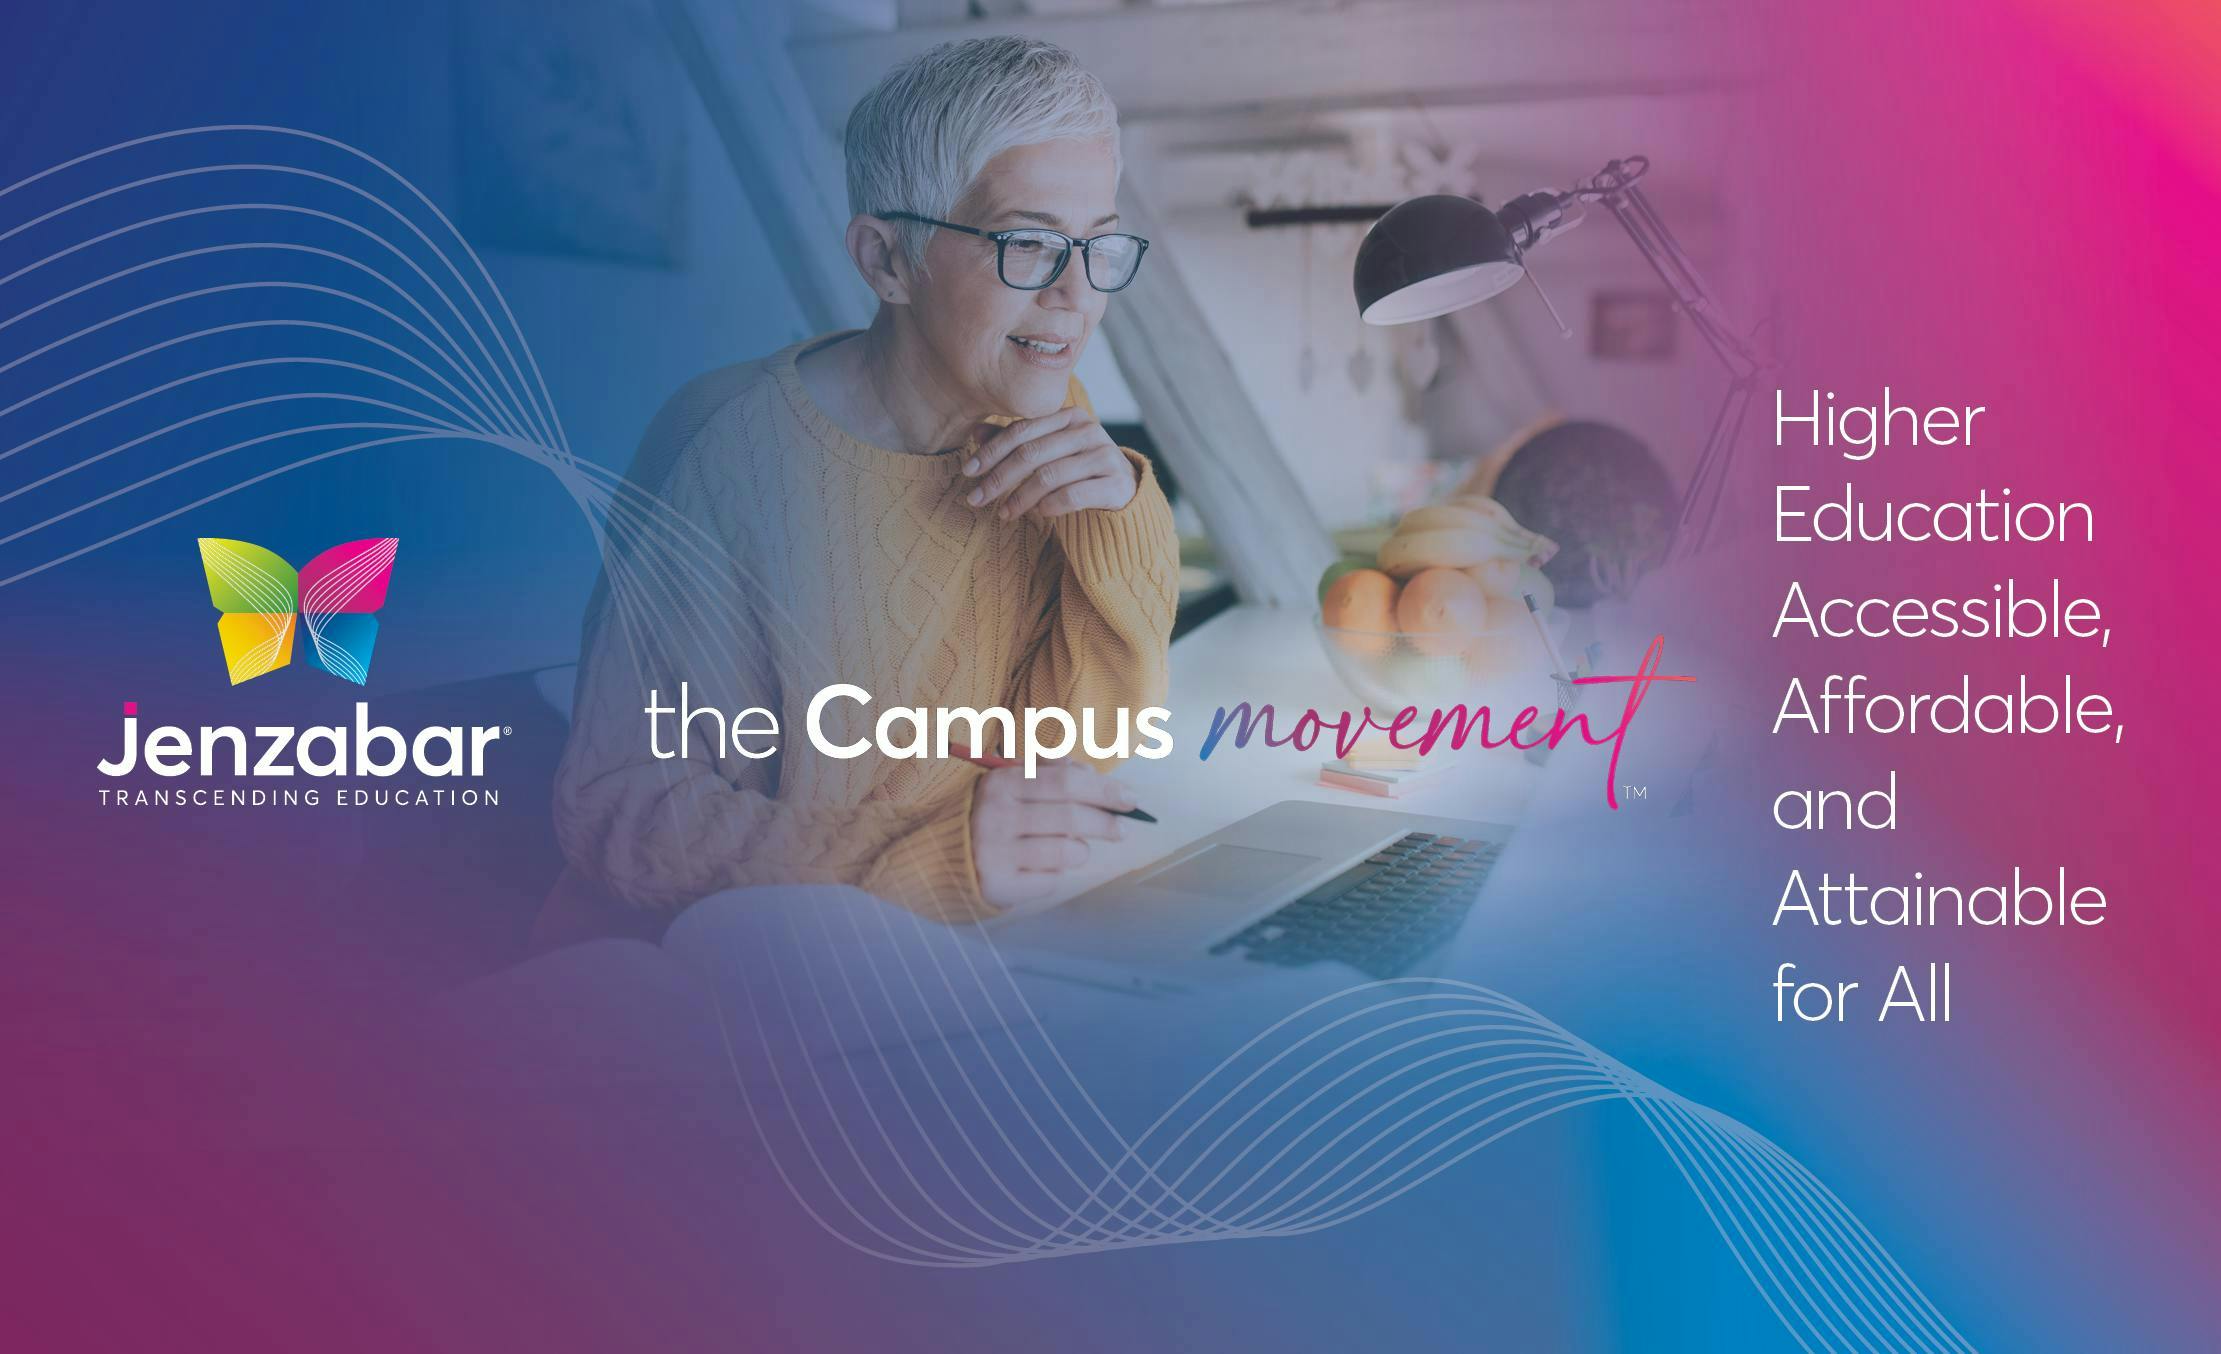 The Campus Movement